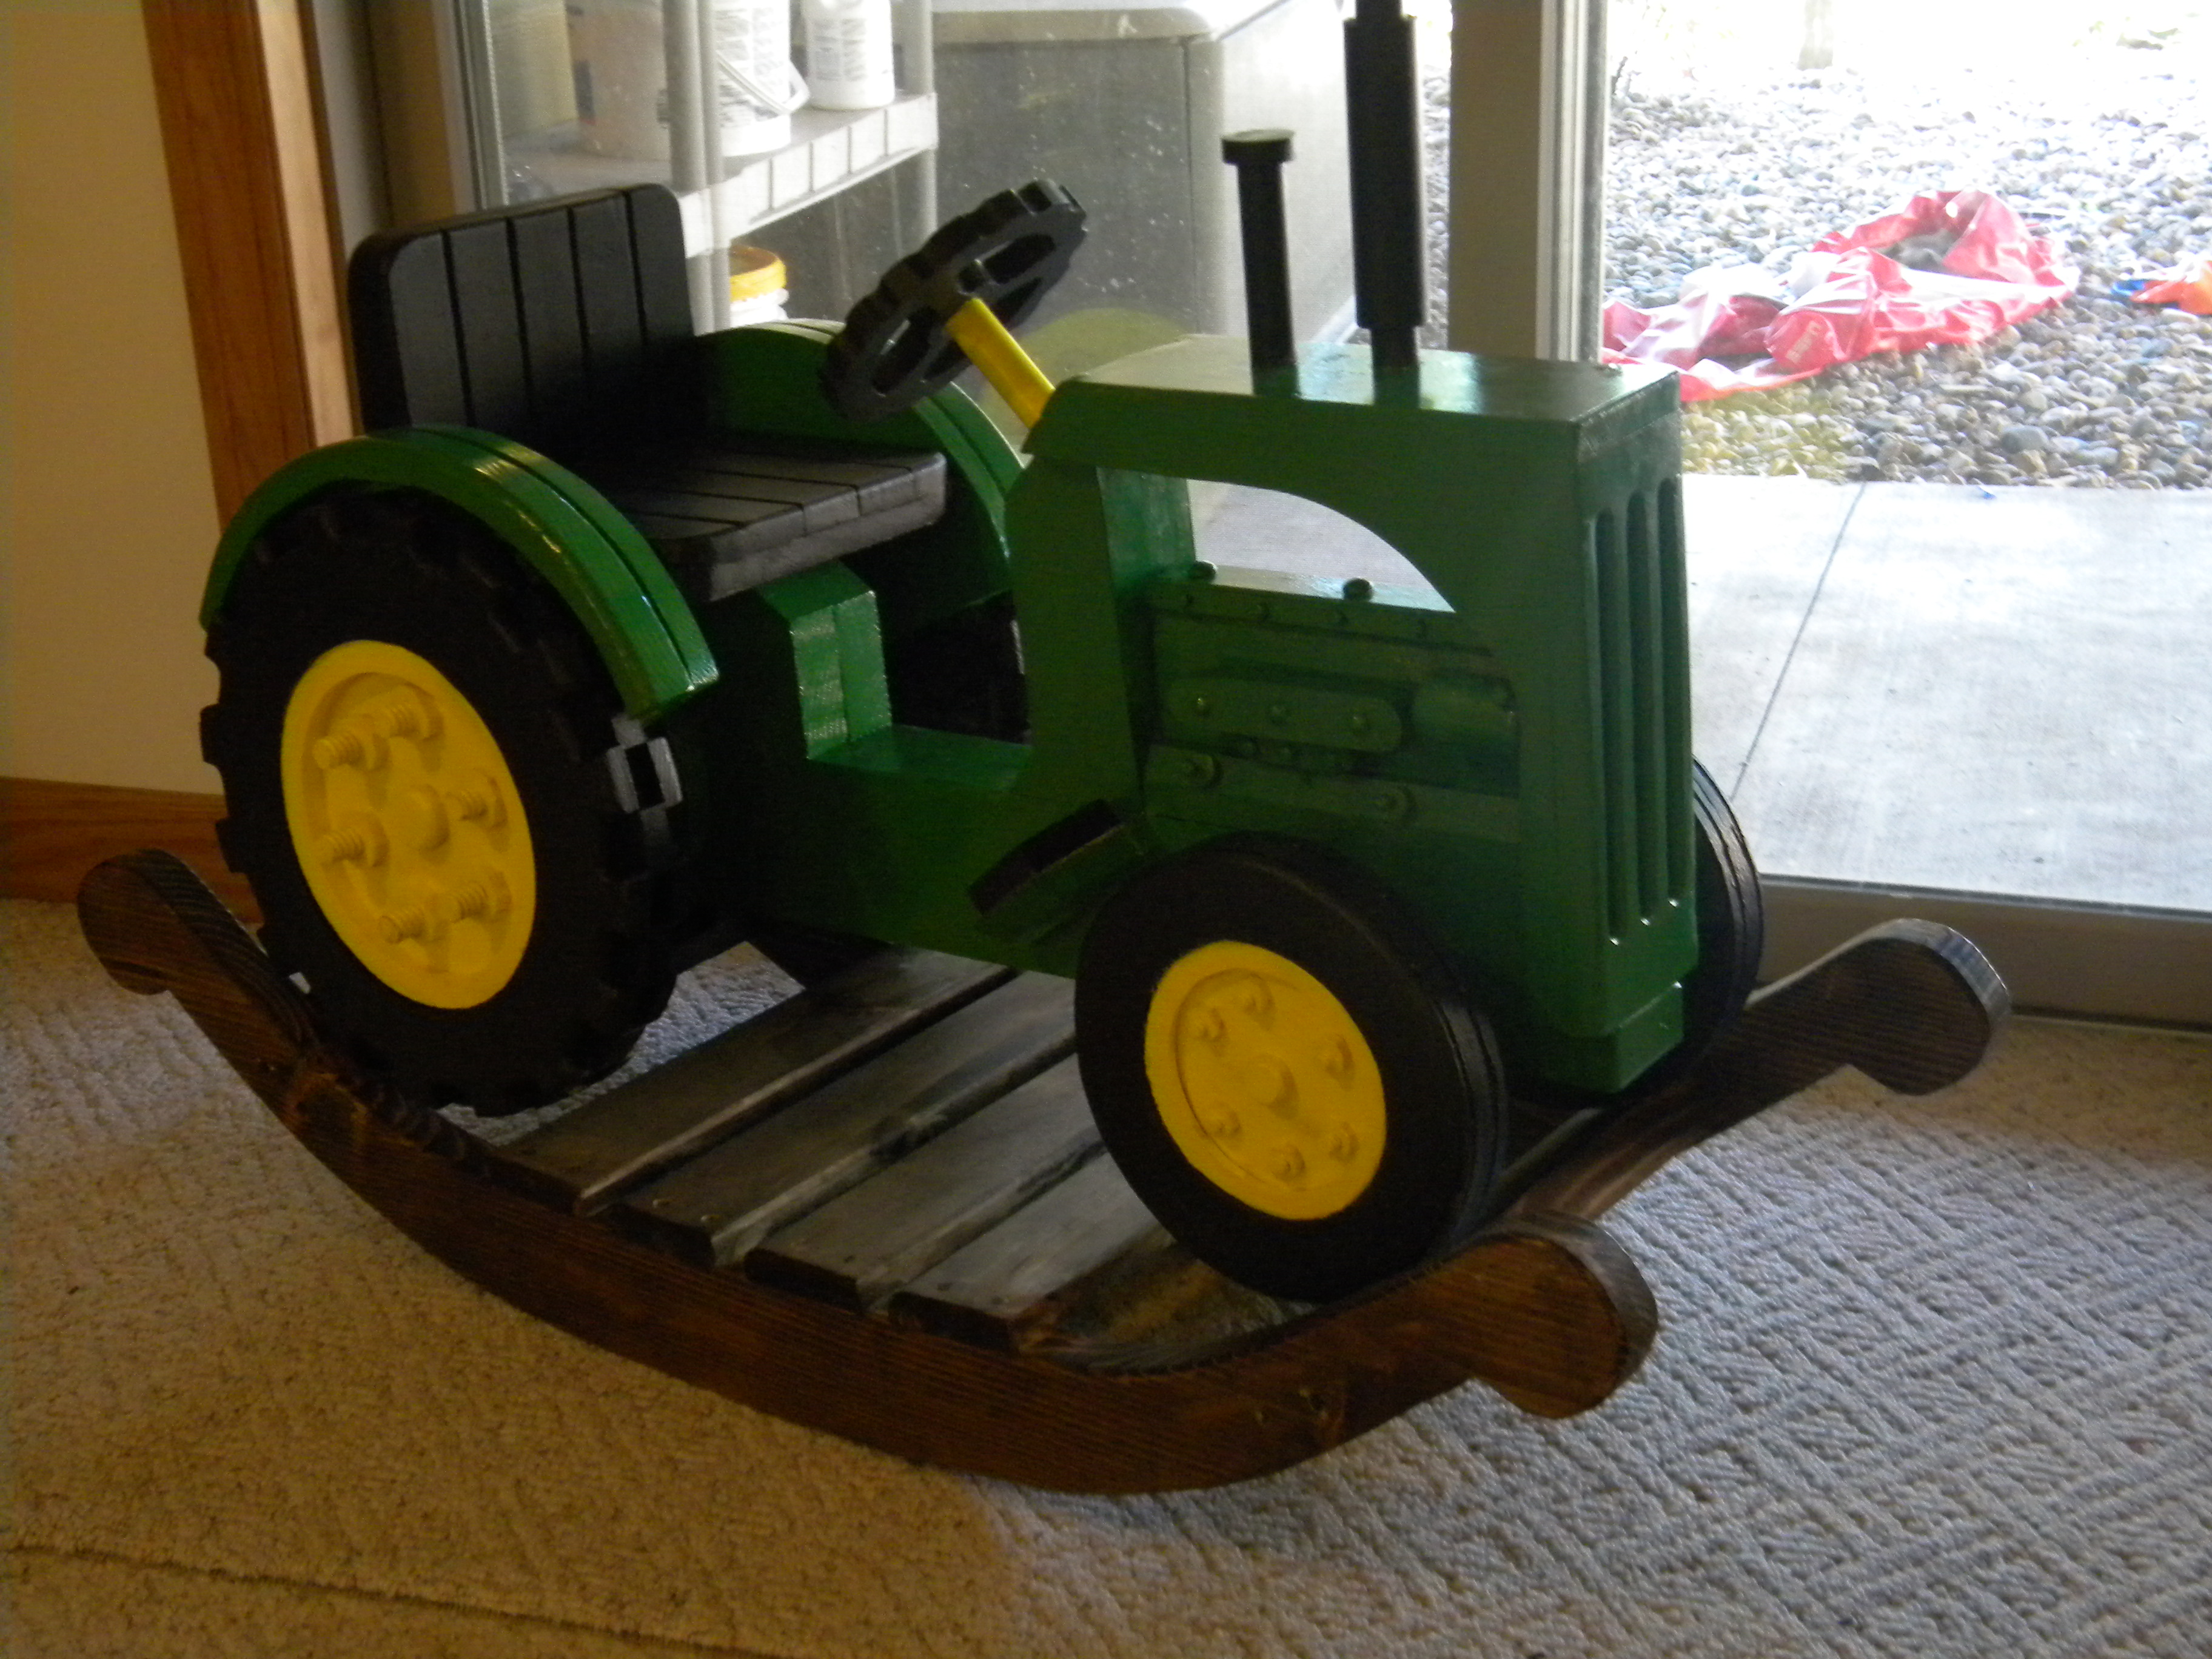 wooden rocking tractor